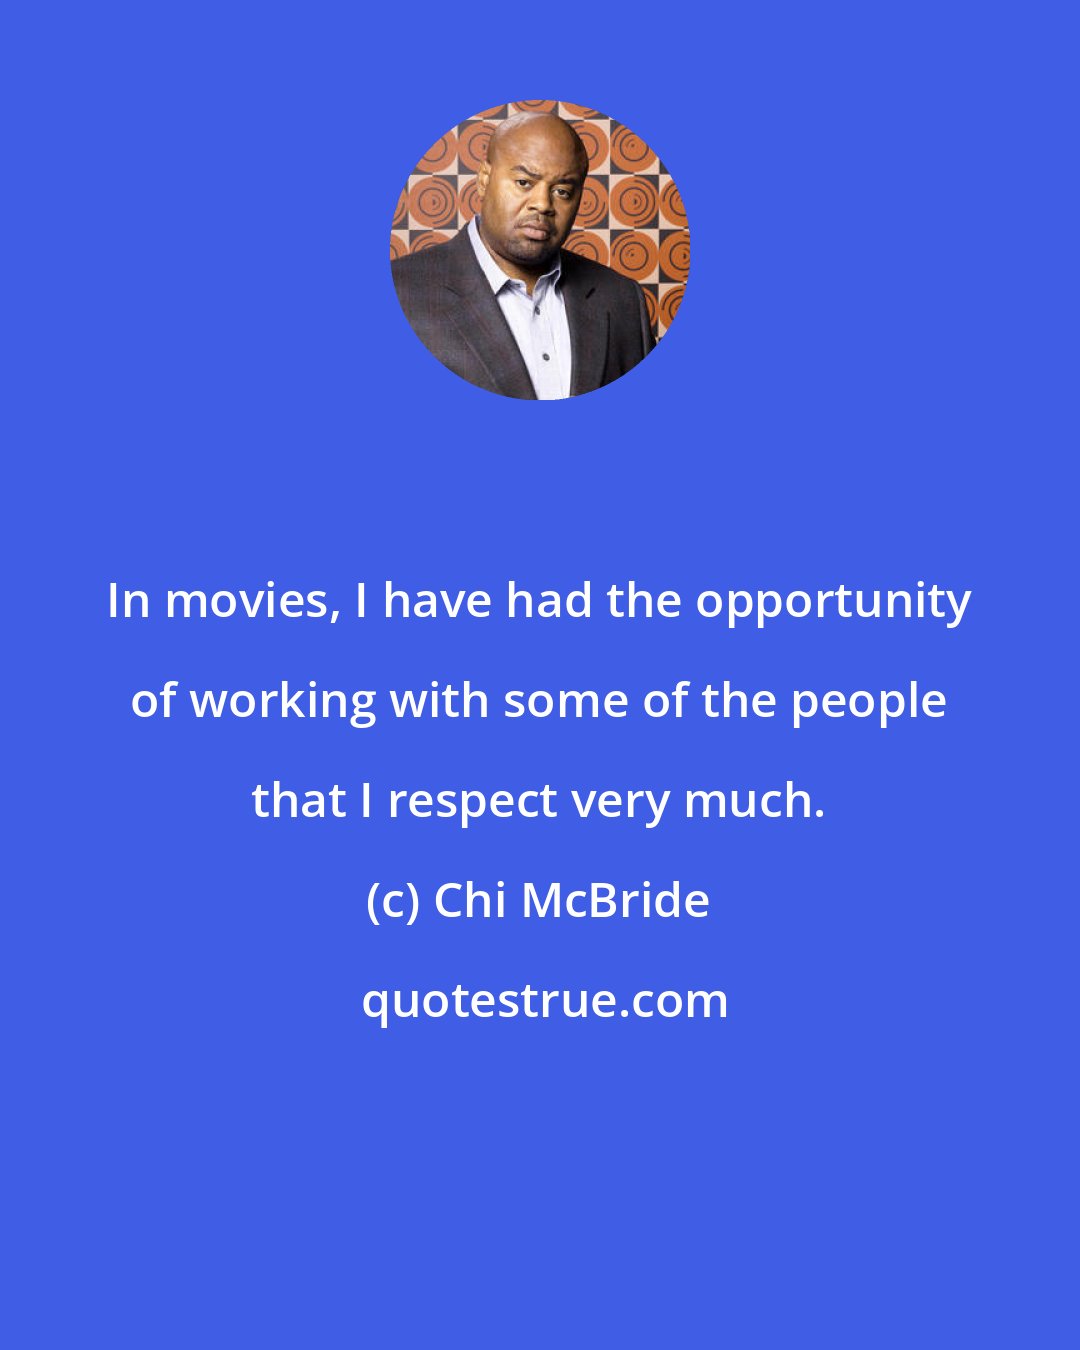 Chi McBride: In movies, I have had the opportunity of working with some of the people that I respect very much.